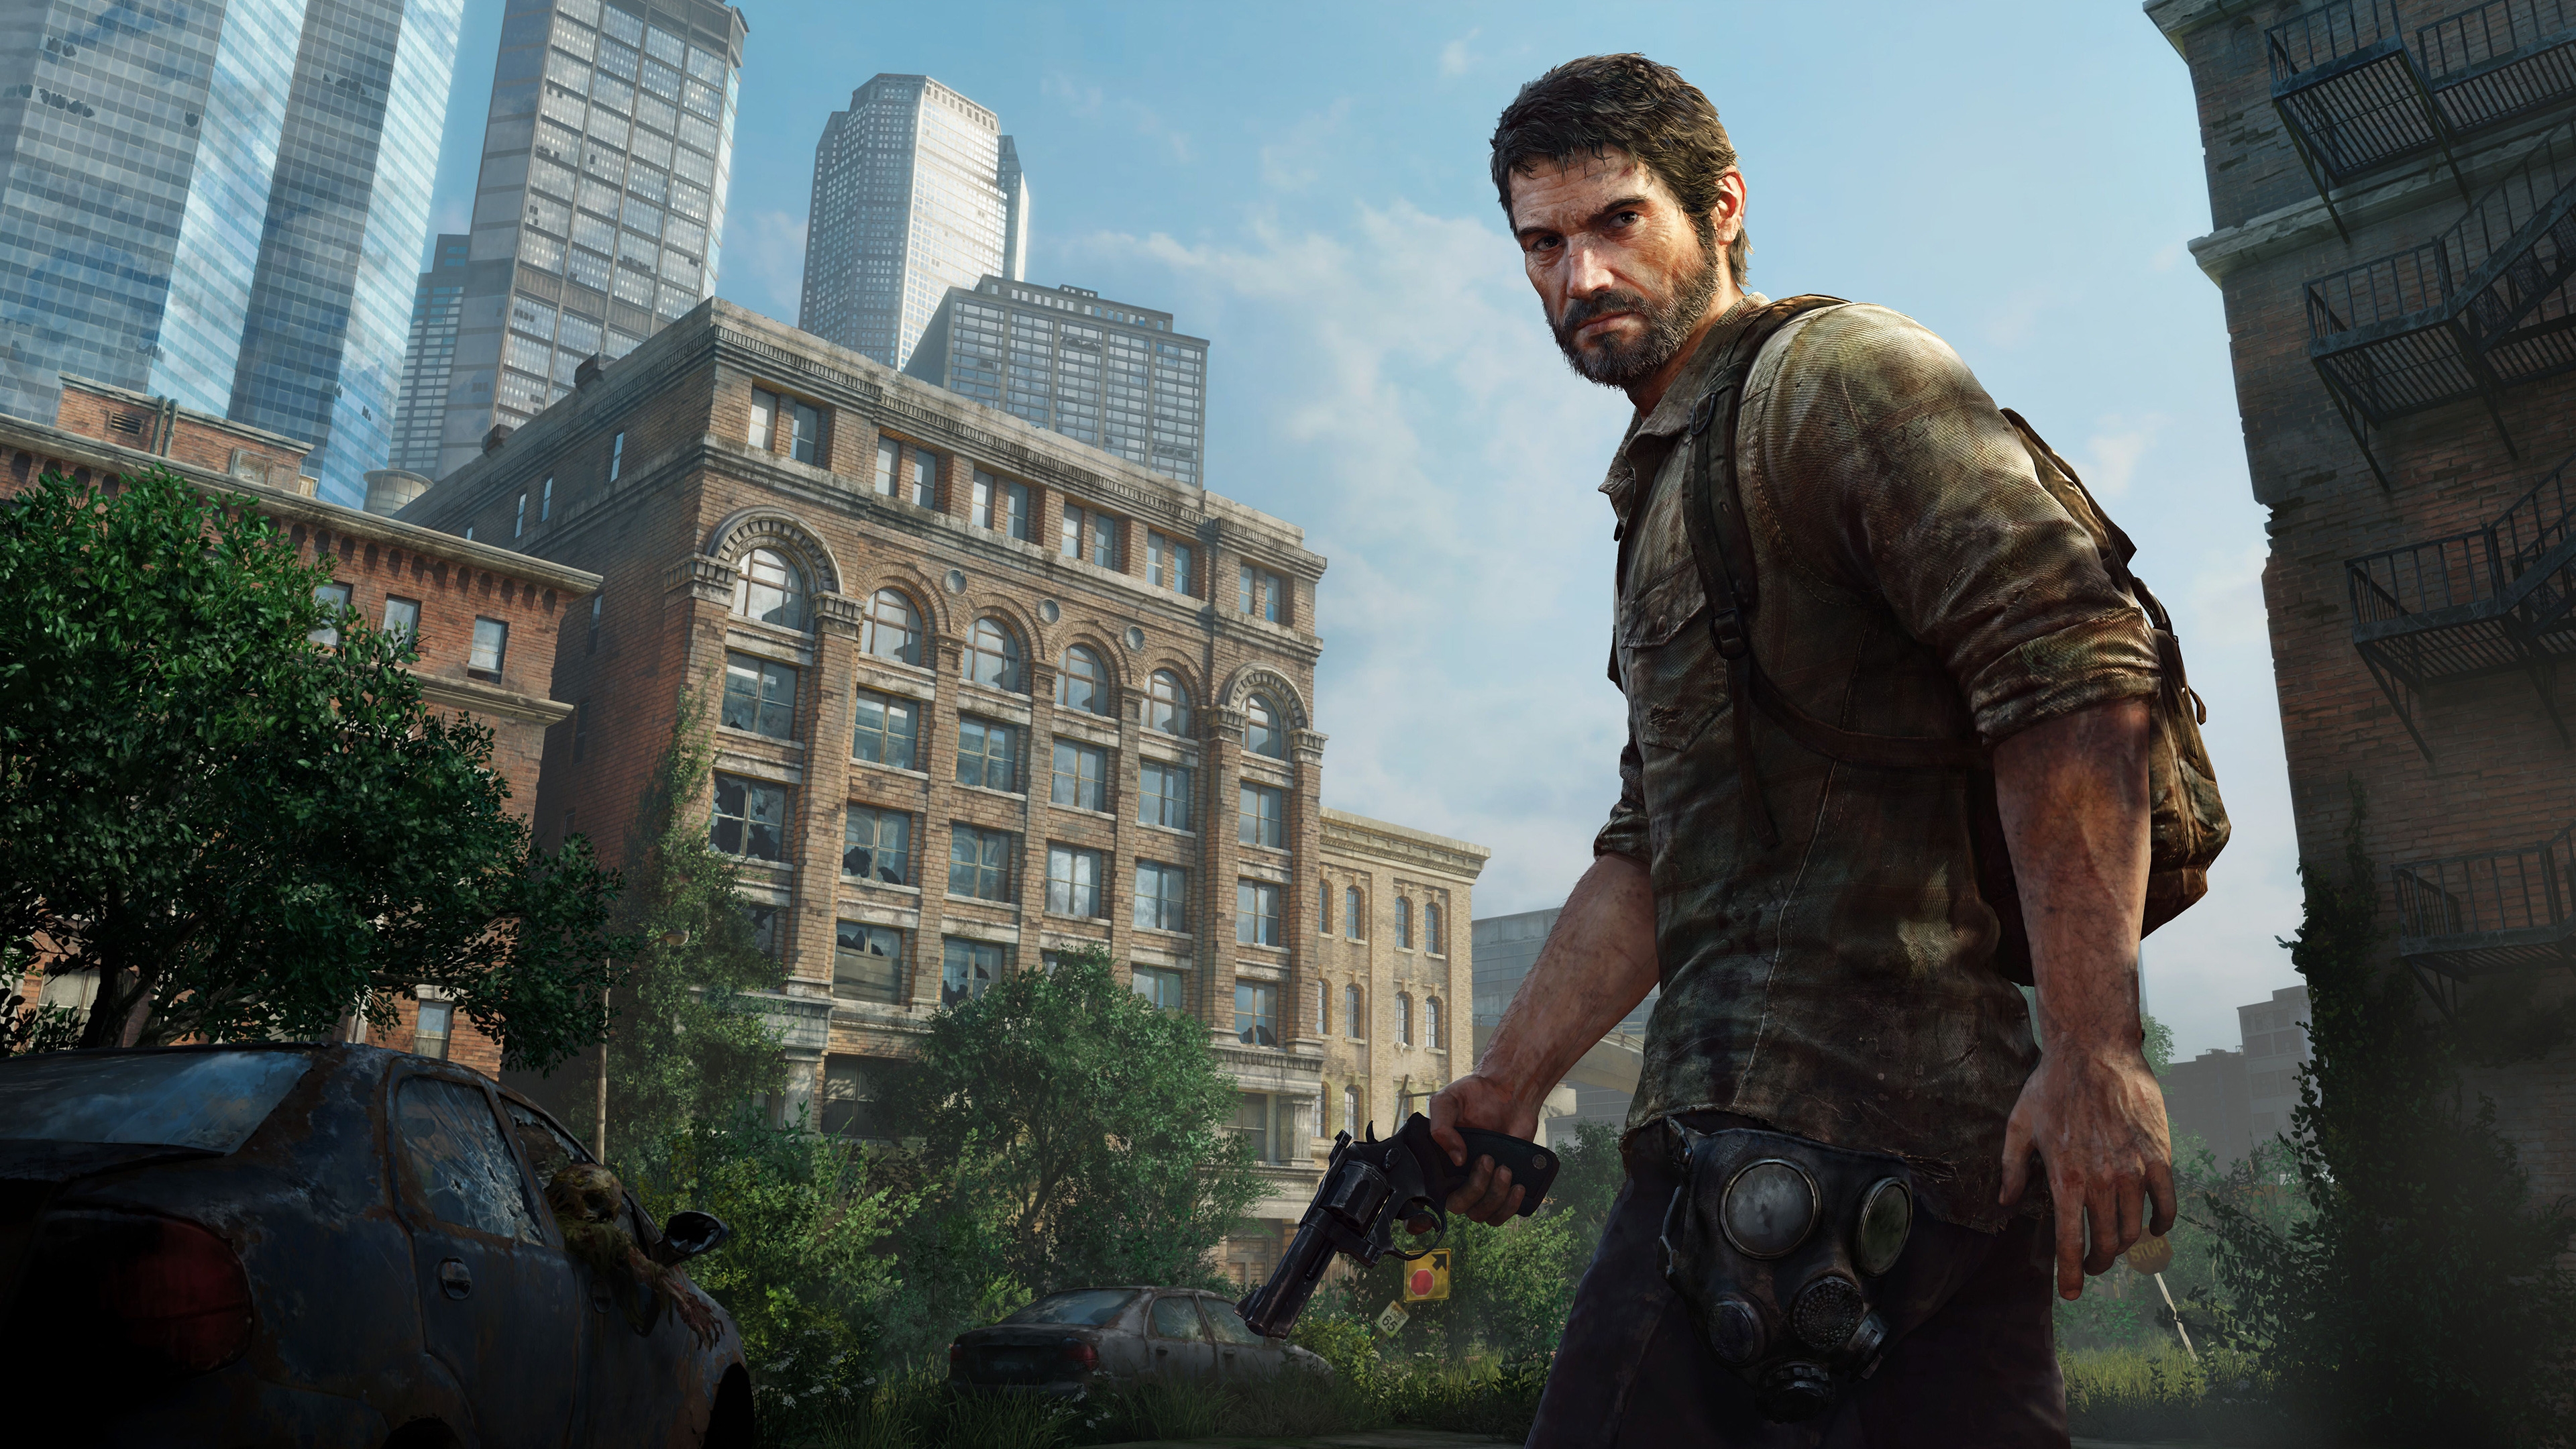 Joel The Last of US for 3840 x 2160 Ultra HD resolution